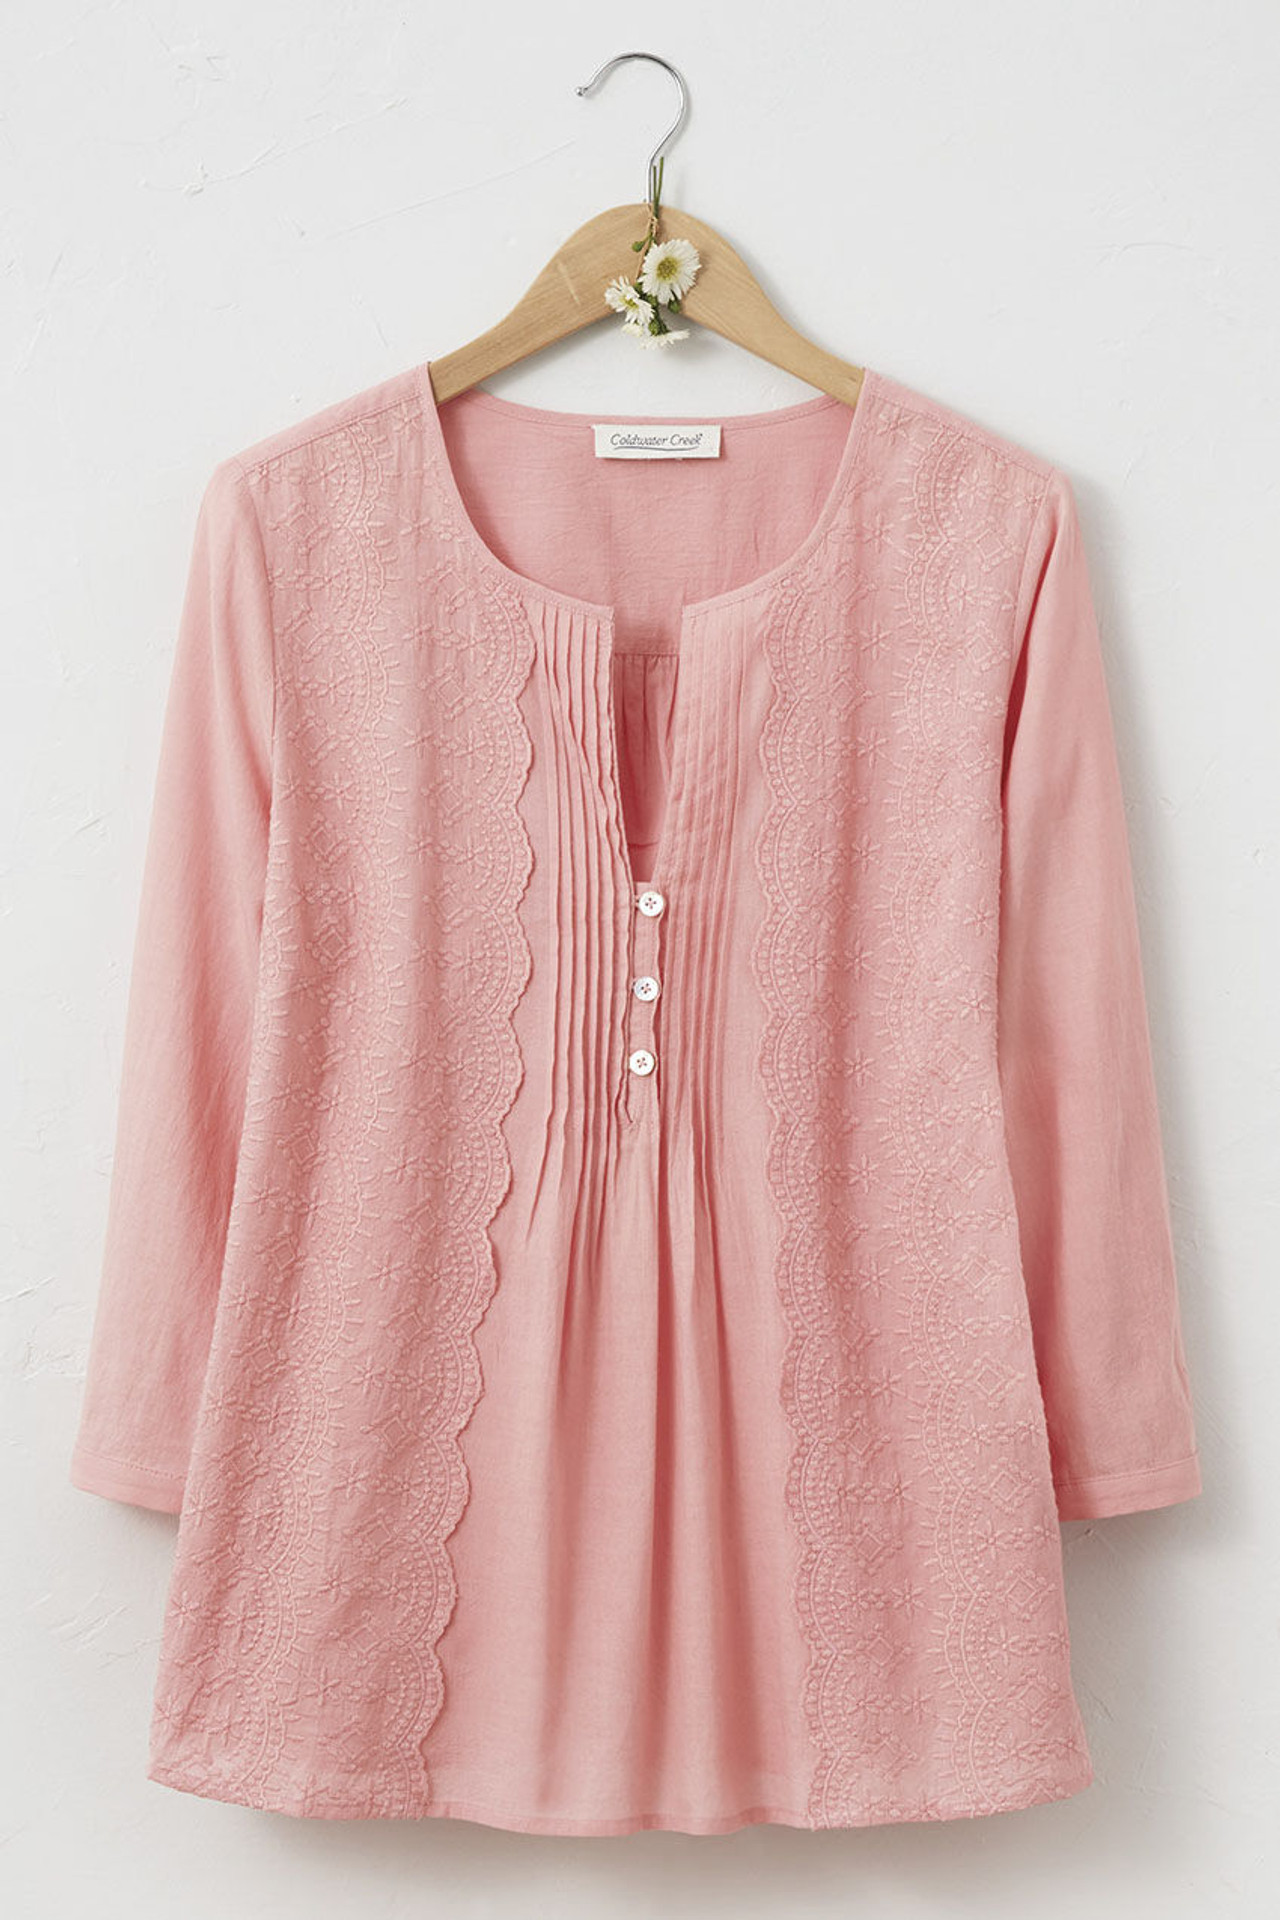 LIV LOS ANGELES Tiered Cotton Eyelet Blouse